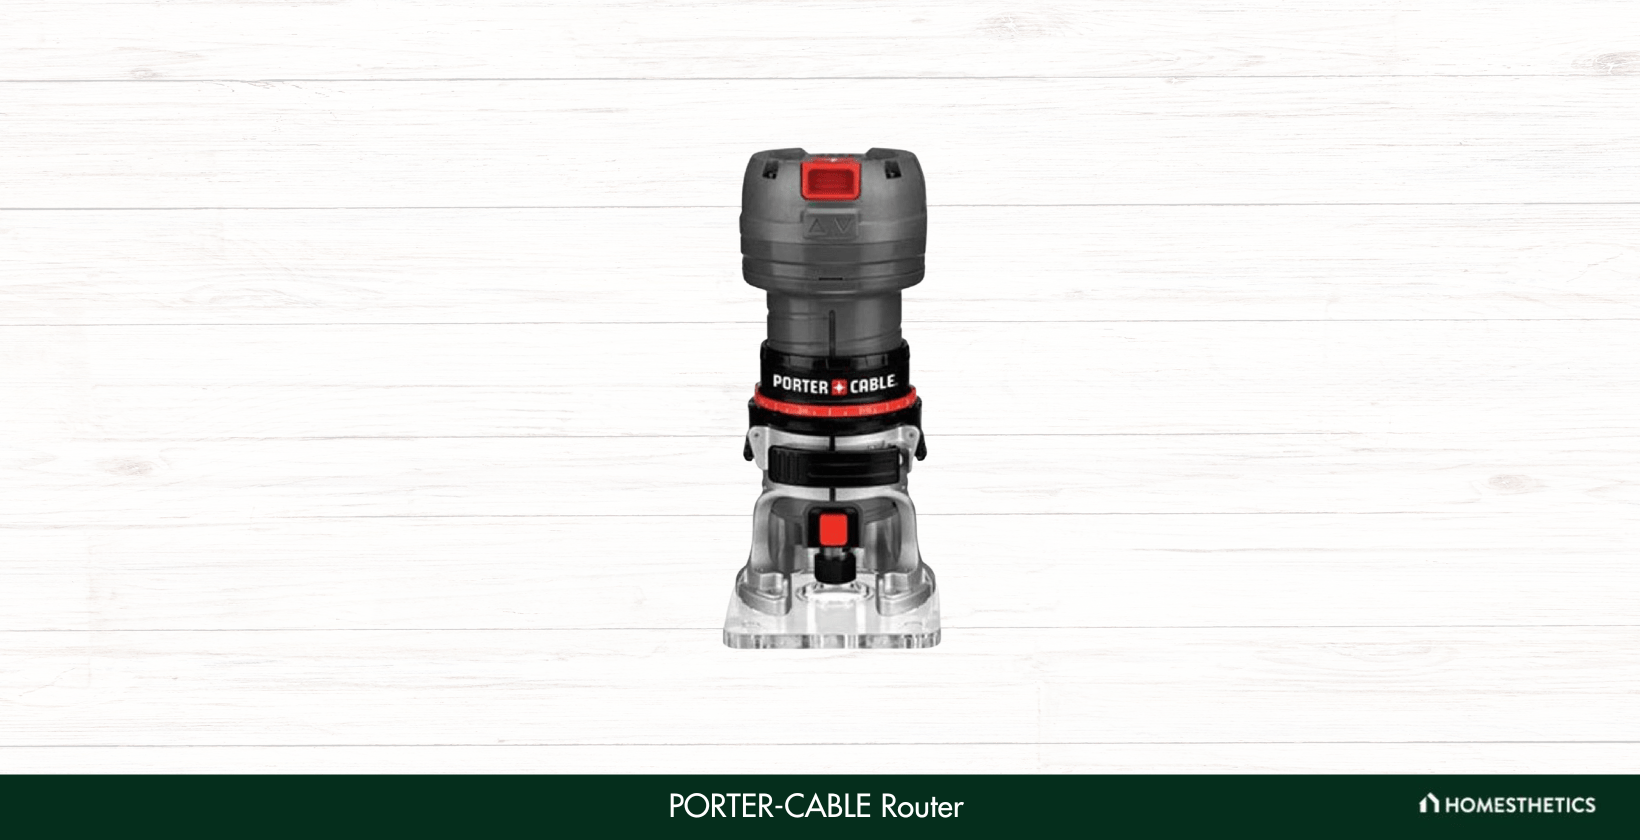 5. PORTER CABLE Router